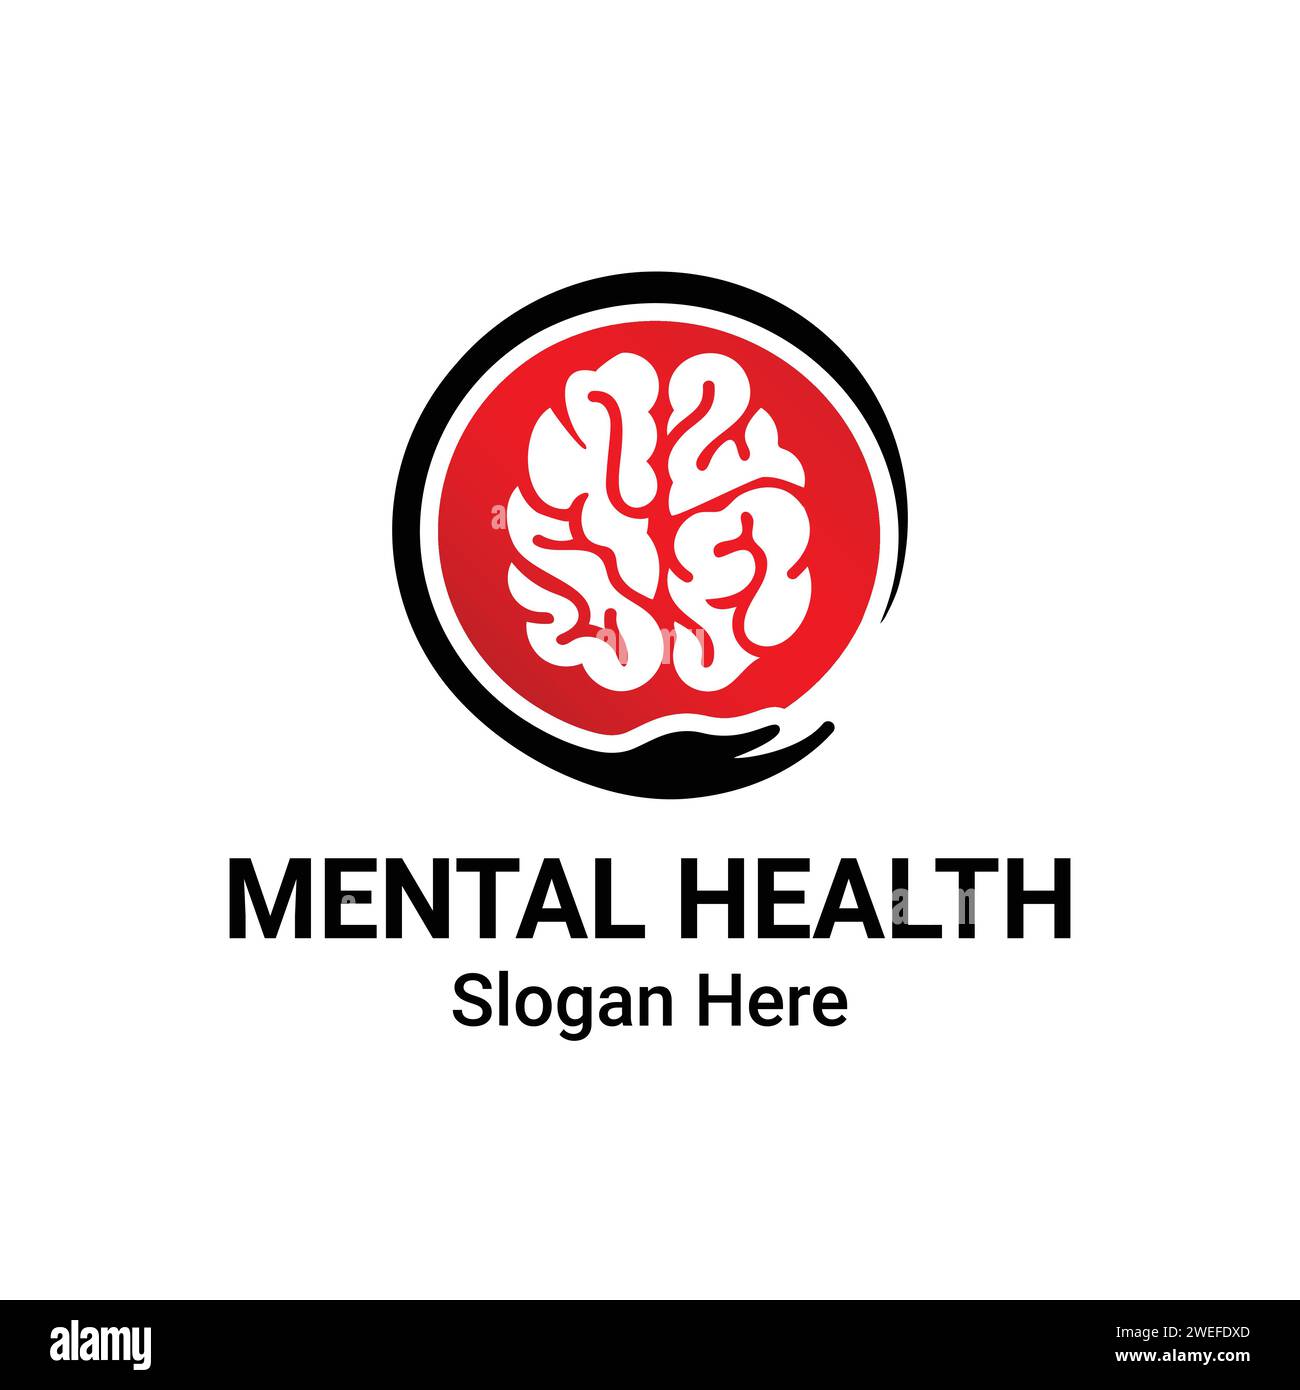 Mental Health Care Logo Design. Psychotherapy Symbol. Human Head with Brain Sign Concept. Stock Vector